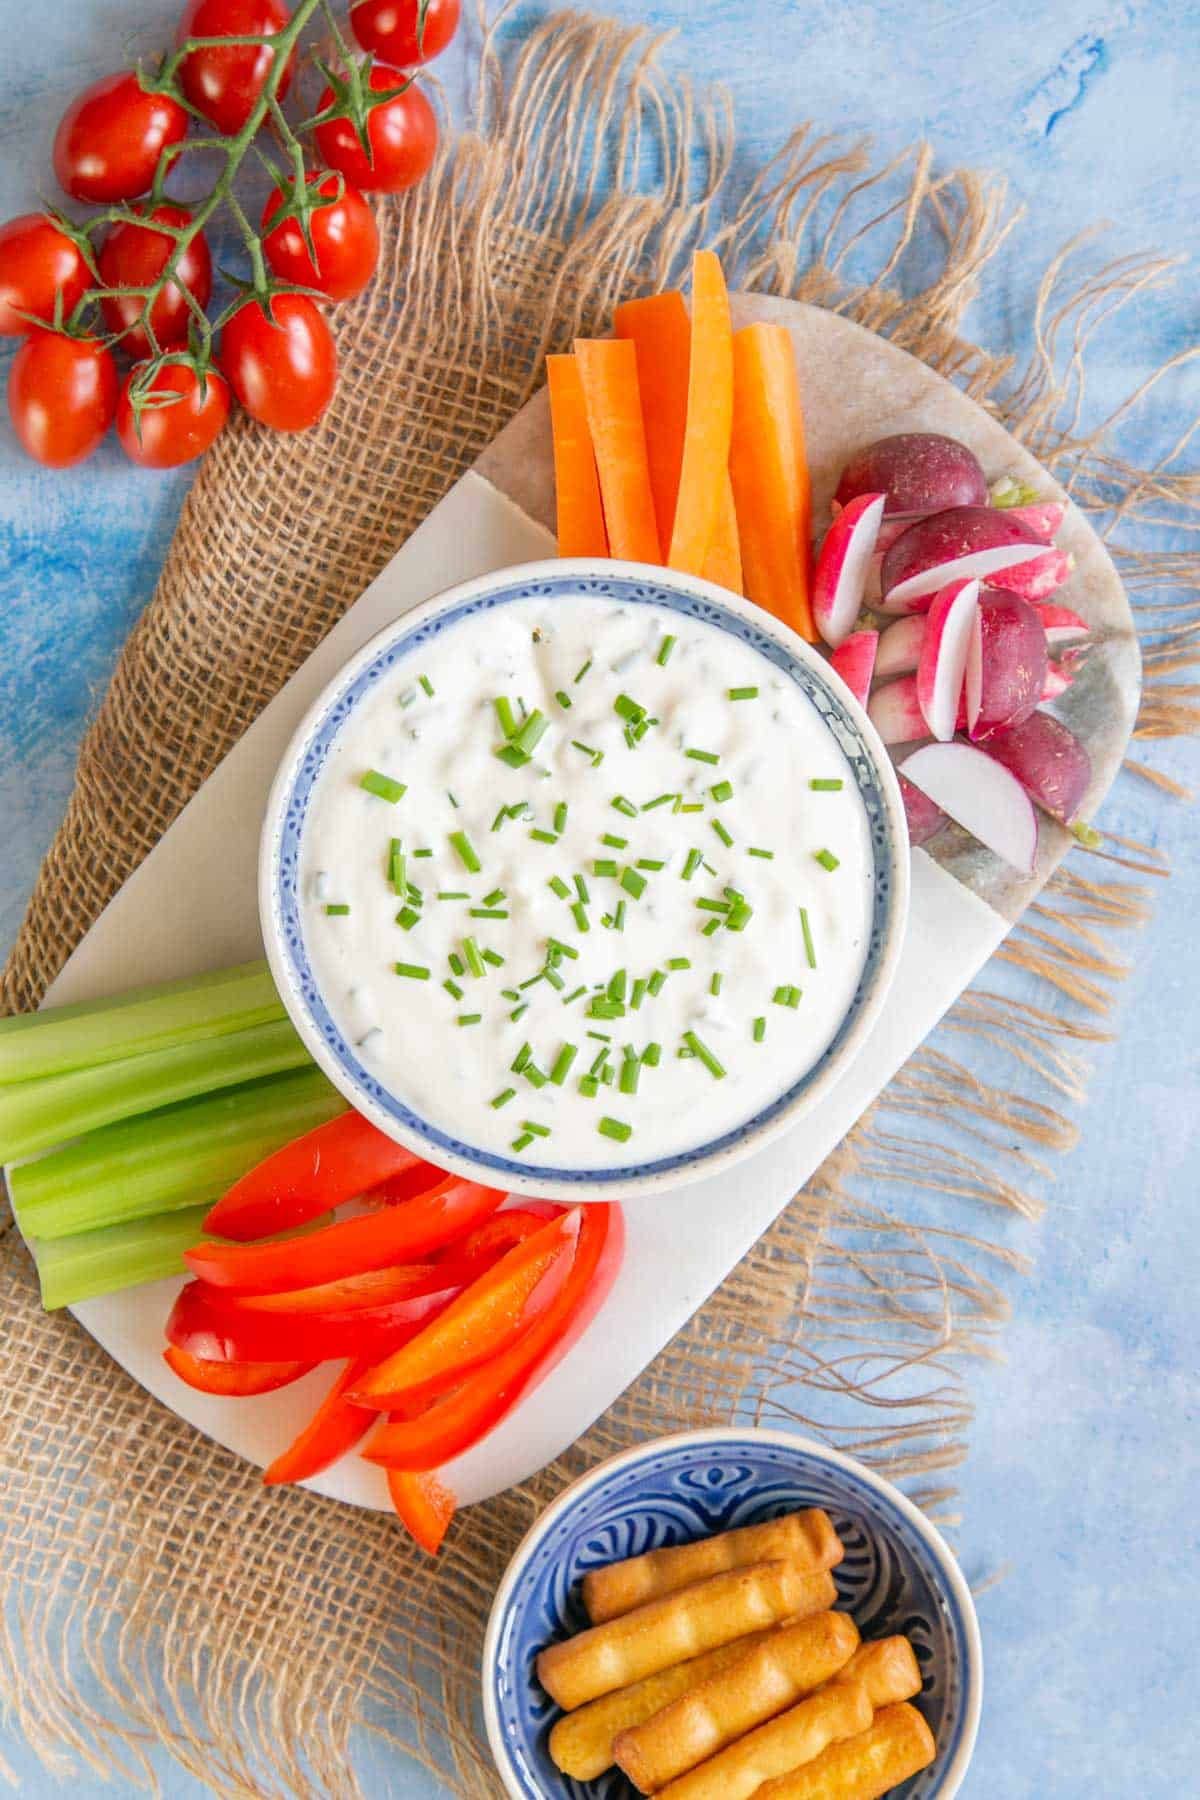 Cool, creamy, delicious sour cream and chives dip served on a platter with mixed crudités